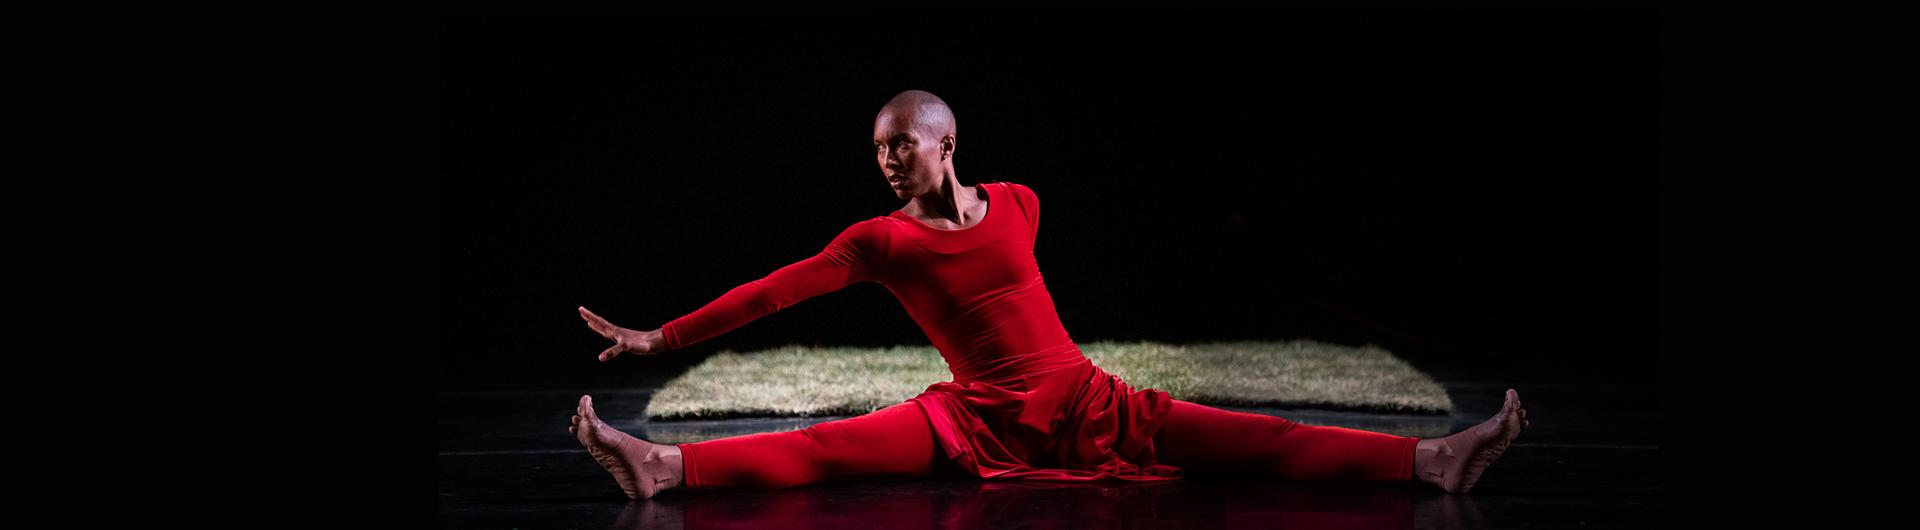 A member of A.I.M by Kyle Abraham on stage. A rectangle of grass can be seen behind the red-clad dancer.